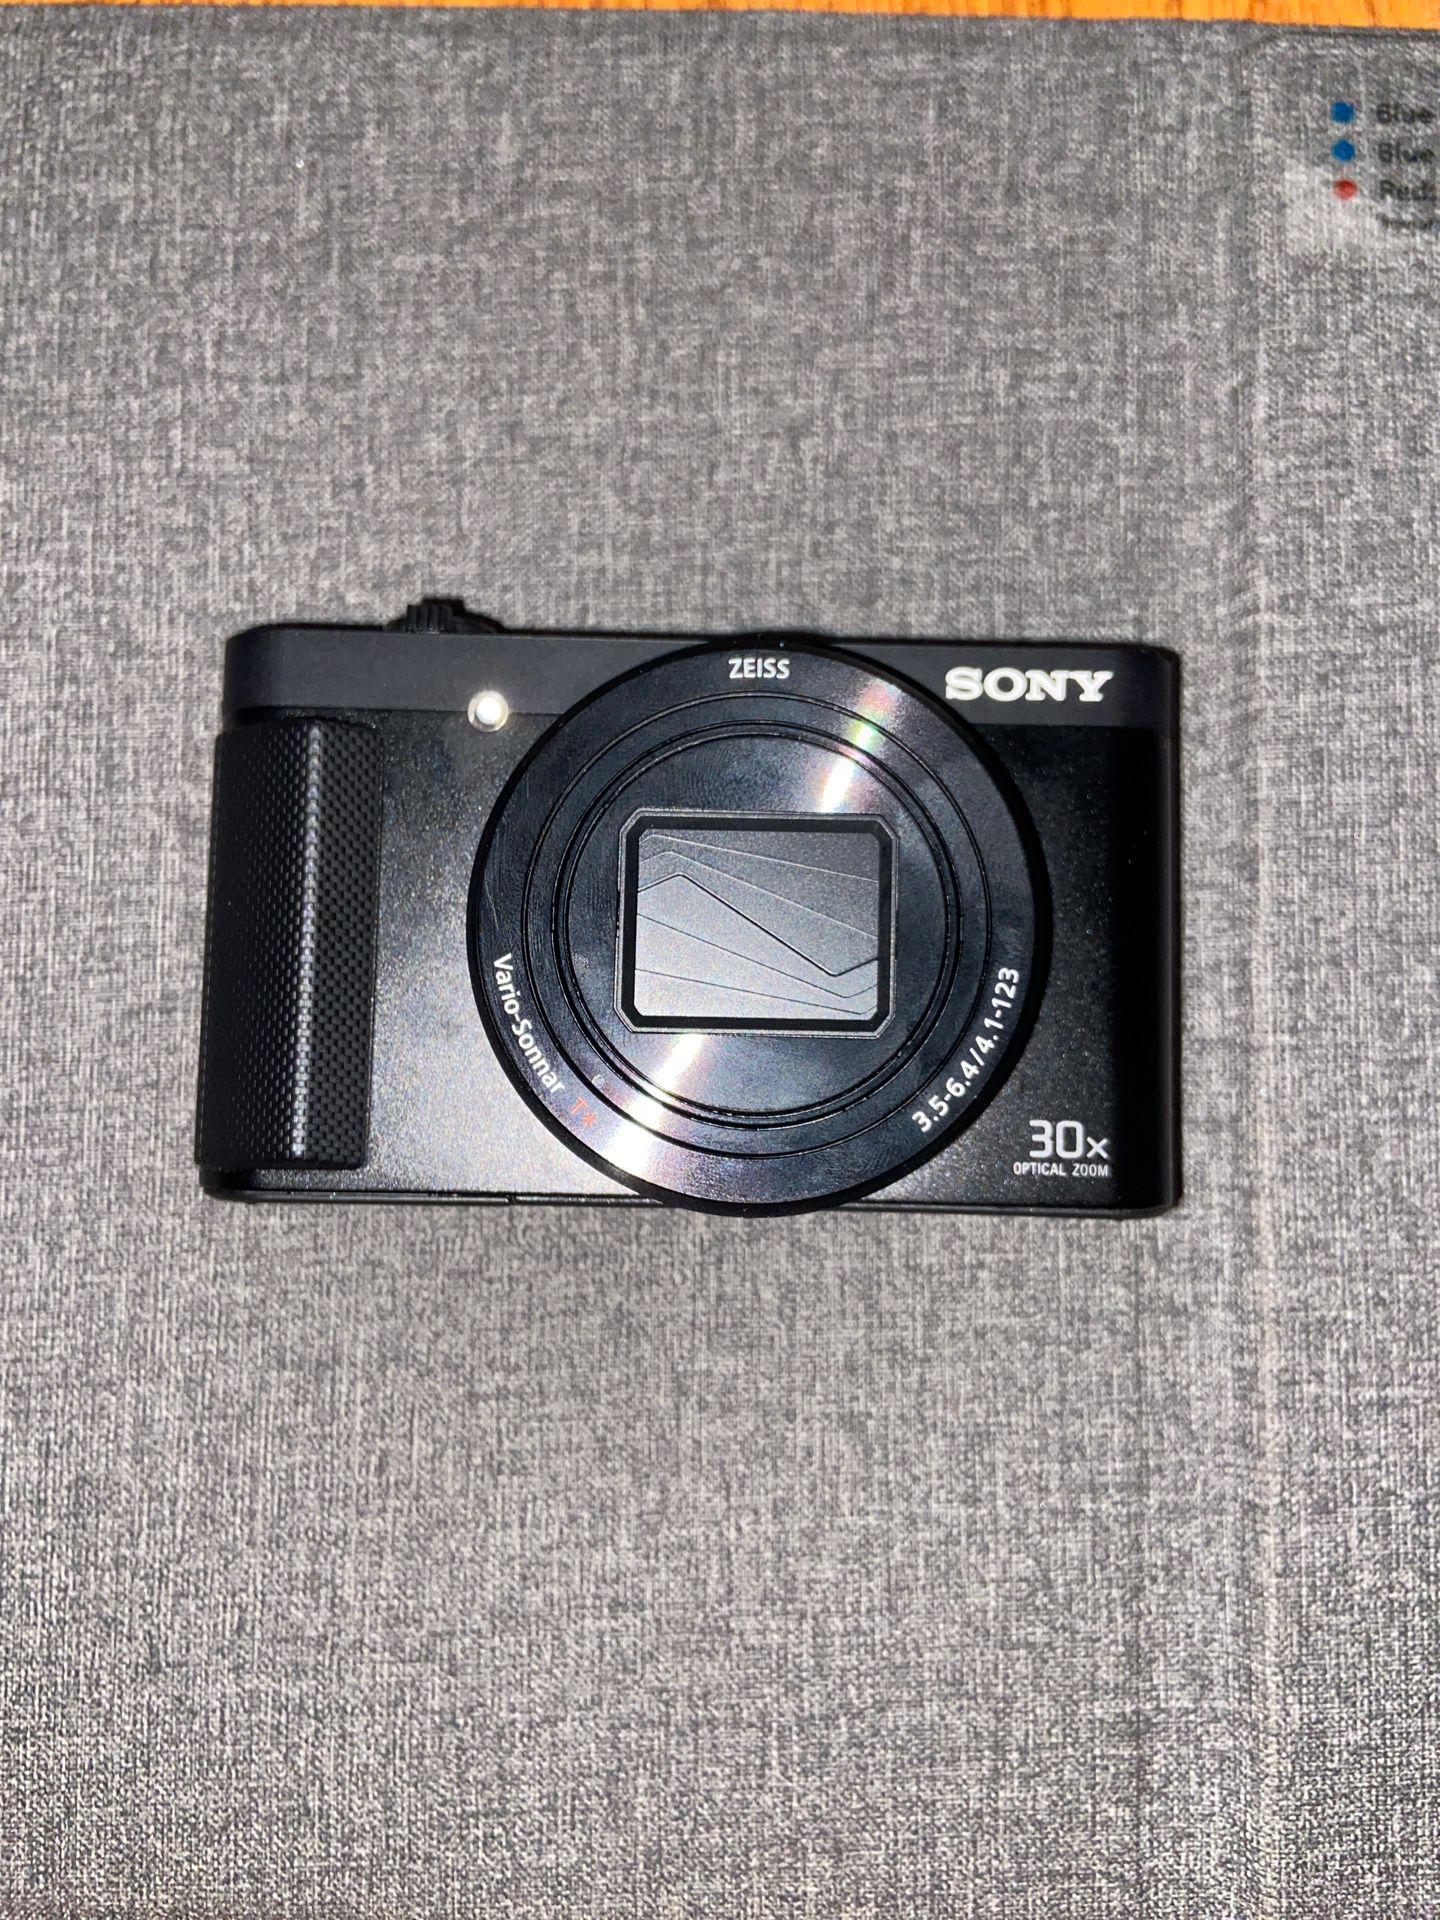 Sony DSC-HX80 Camera With Extra Batteries